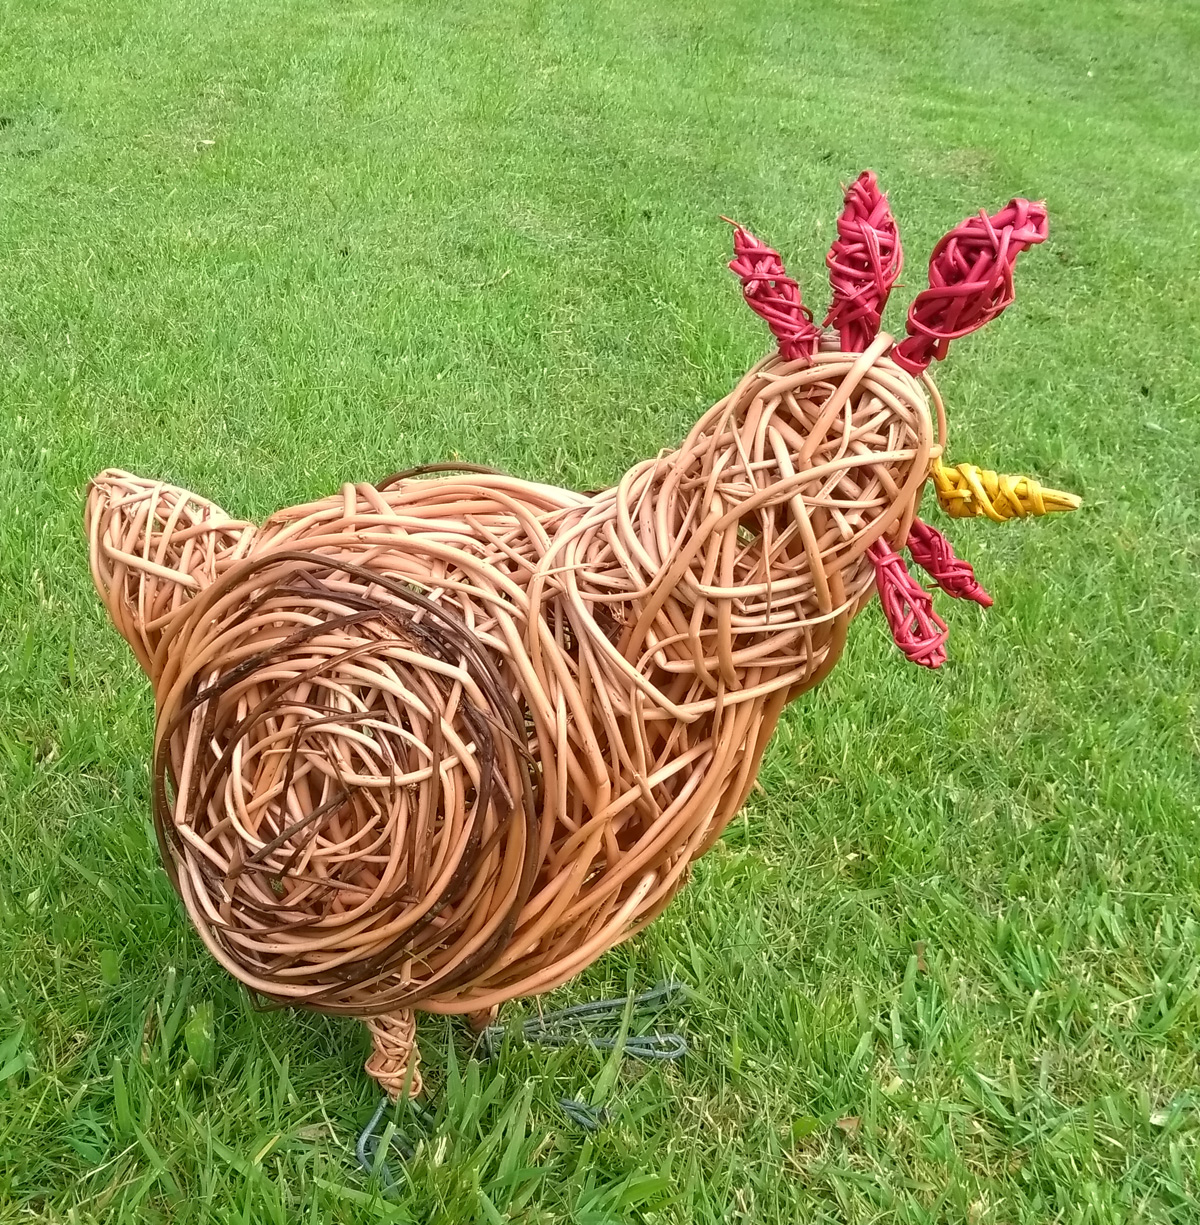 Willow sculpture of a chicken, made of willows and wire legs